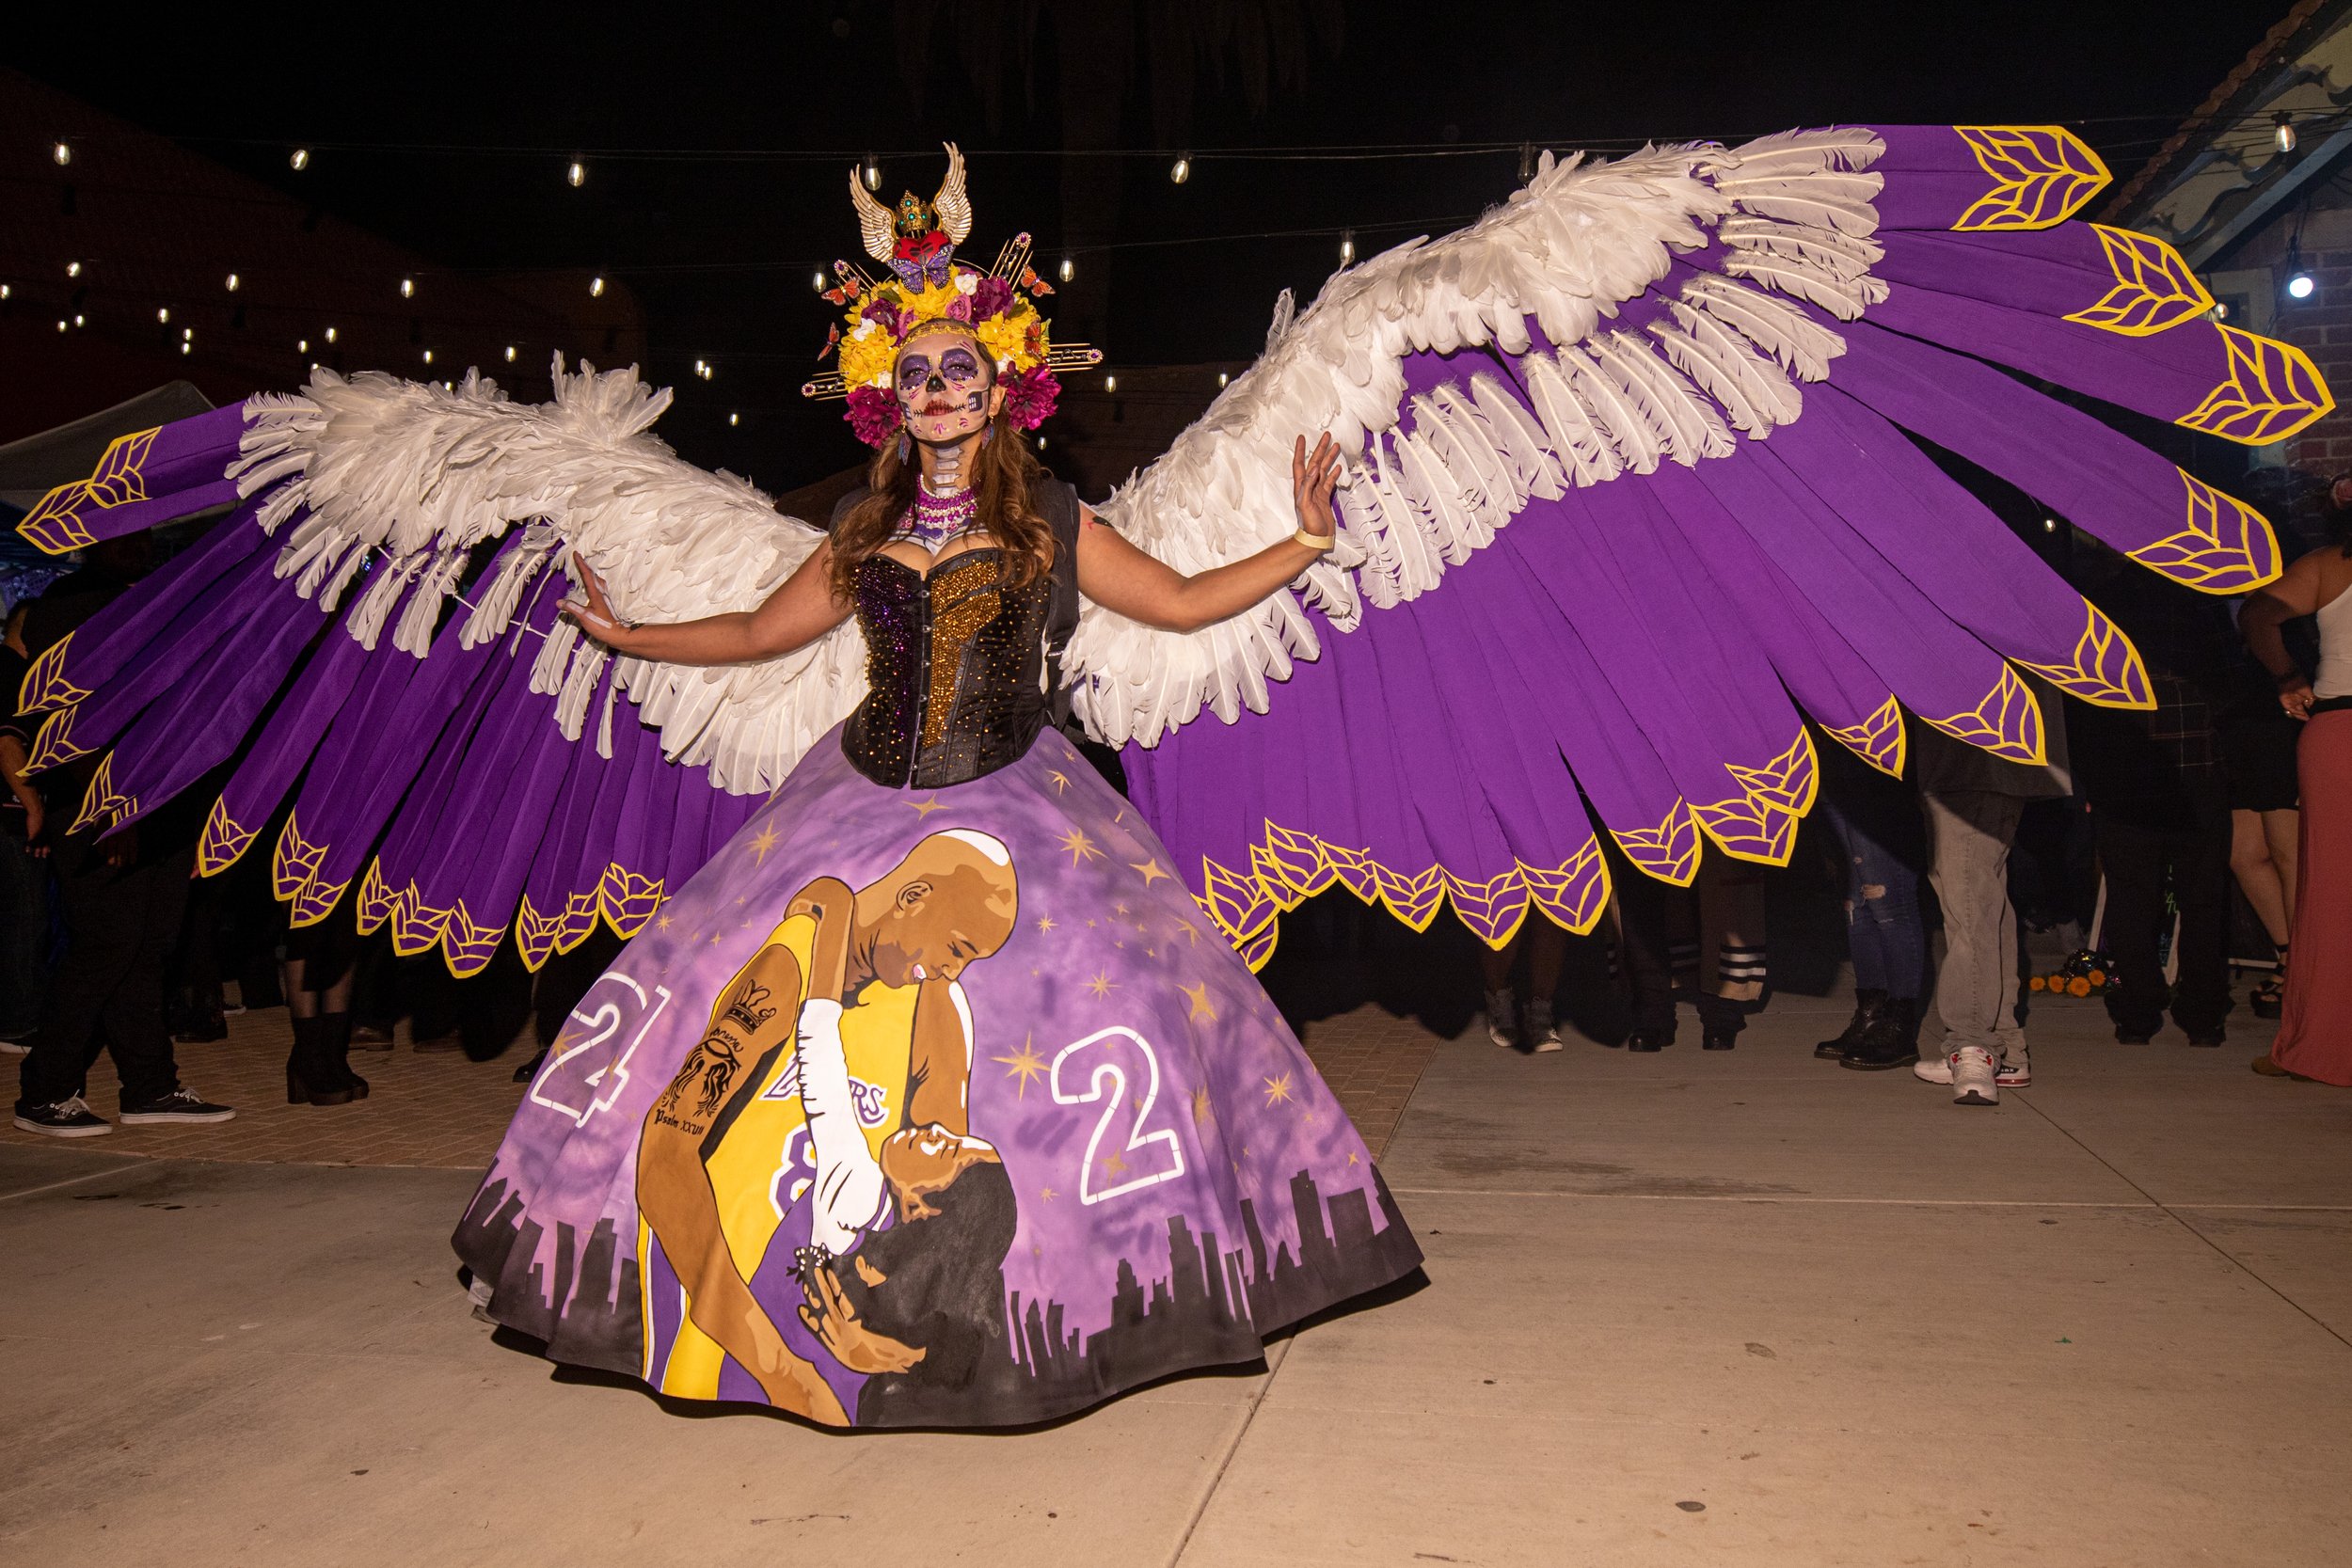  "La Catrina Chicana", wearing a Catrina outfit she designed, stands with her wings fully extended, her dress featuring a mural of Kobe and Gigi Bryant. She designed it in 2020 and is wearing it for the first time tonight at El Velorio's 13th Day of 